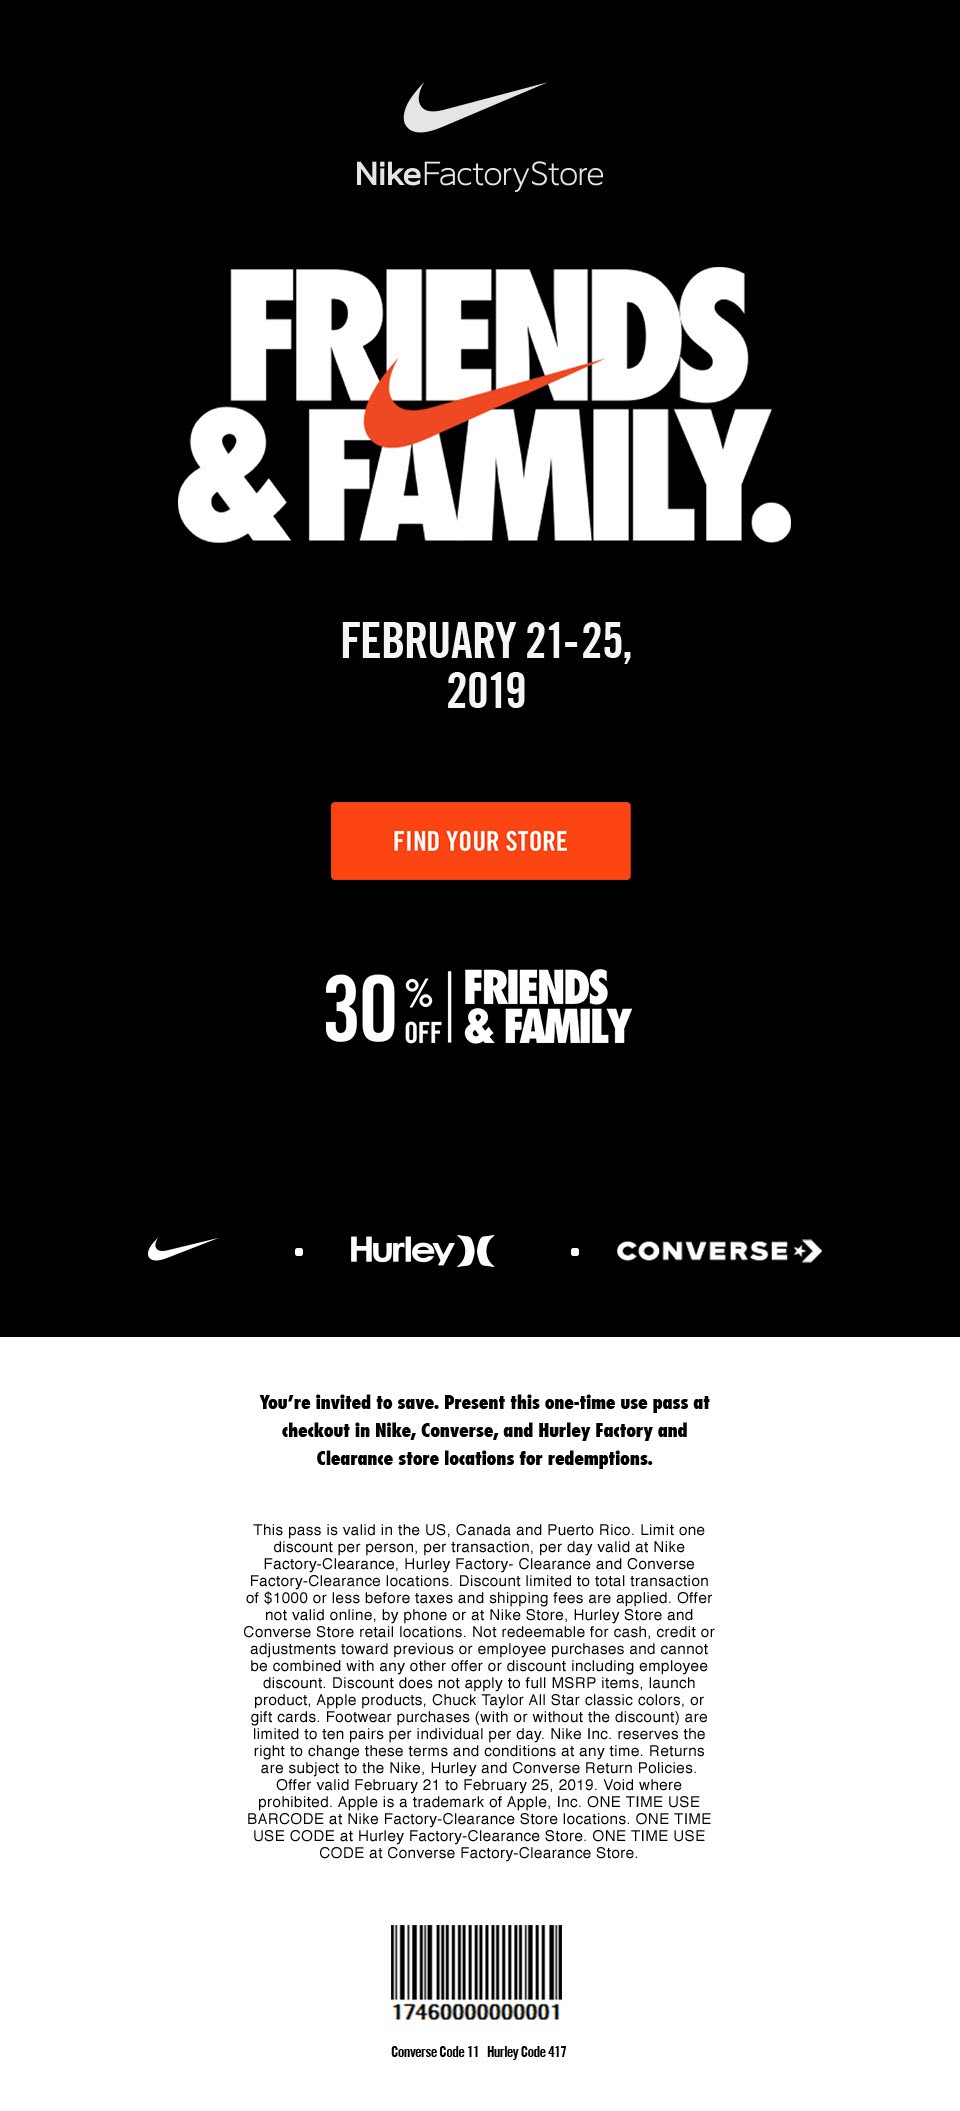 nike coupons in store 2019